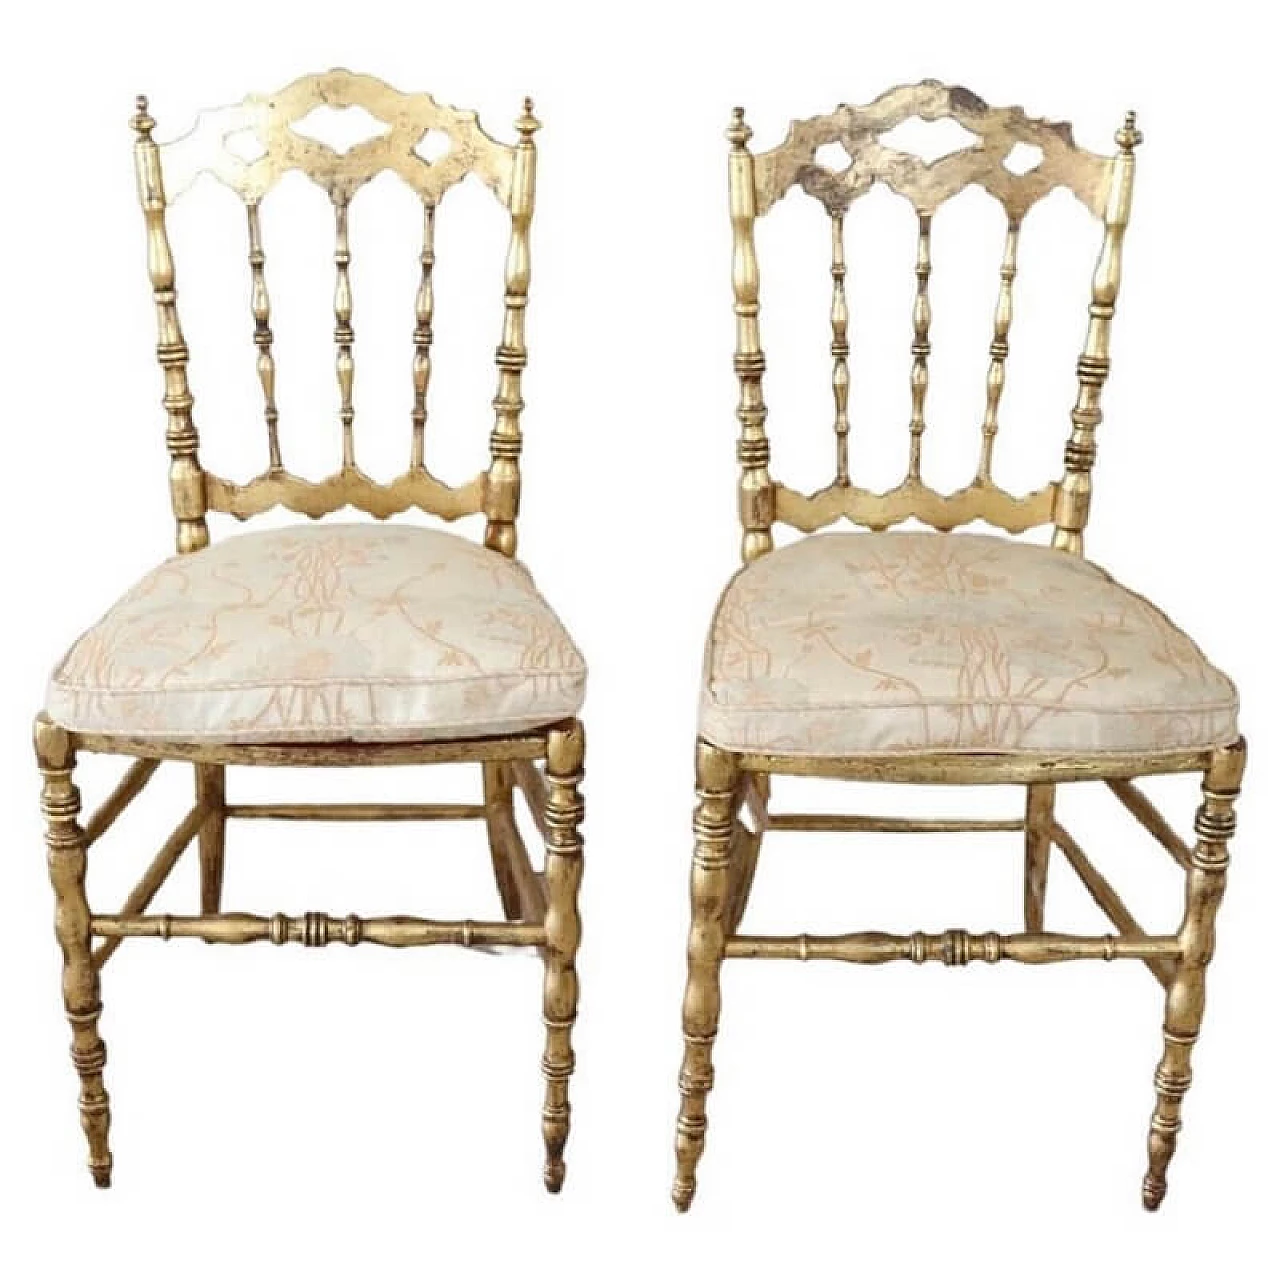 Pair of Chiavarine-type chairs in gilded wood with gold leaf, 19th century 1